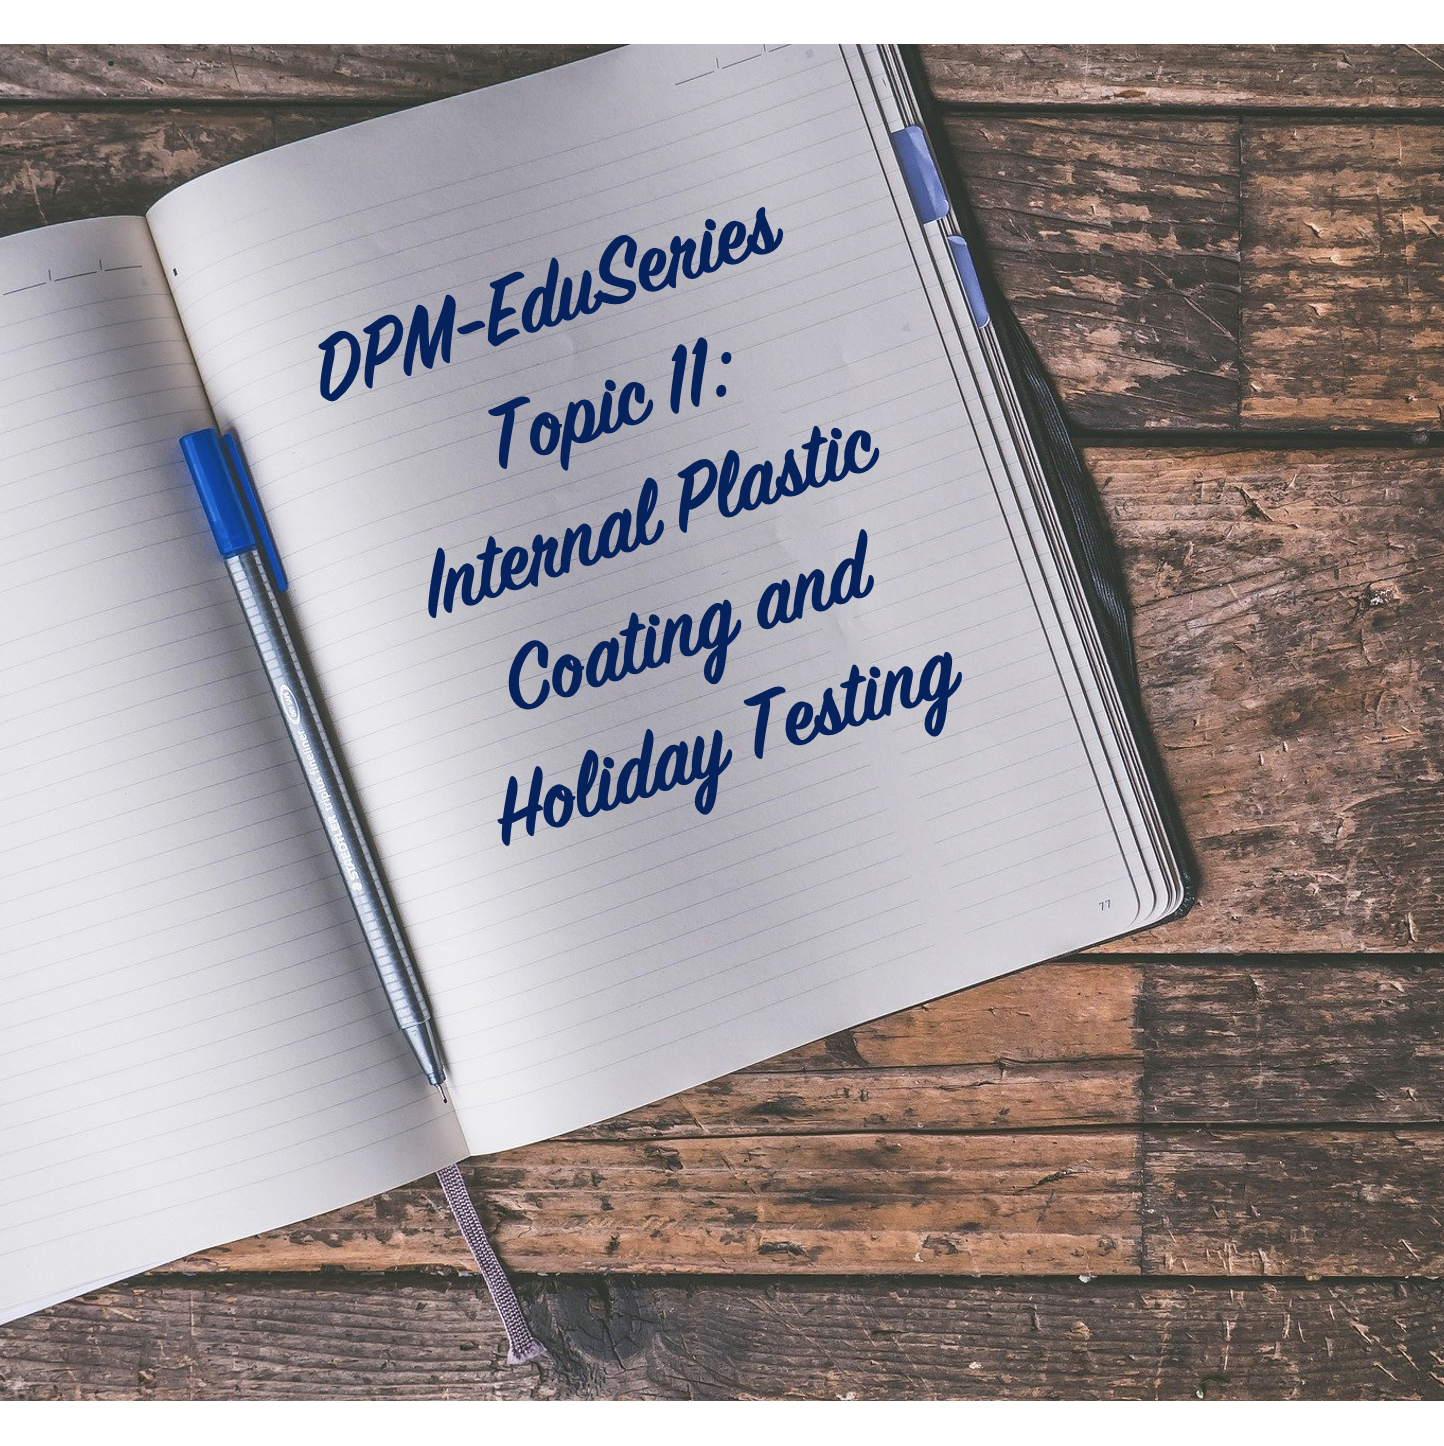 DPM-EduSeries Topic 11: Internal Plastic Coating and Holiday Testing